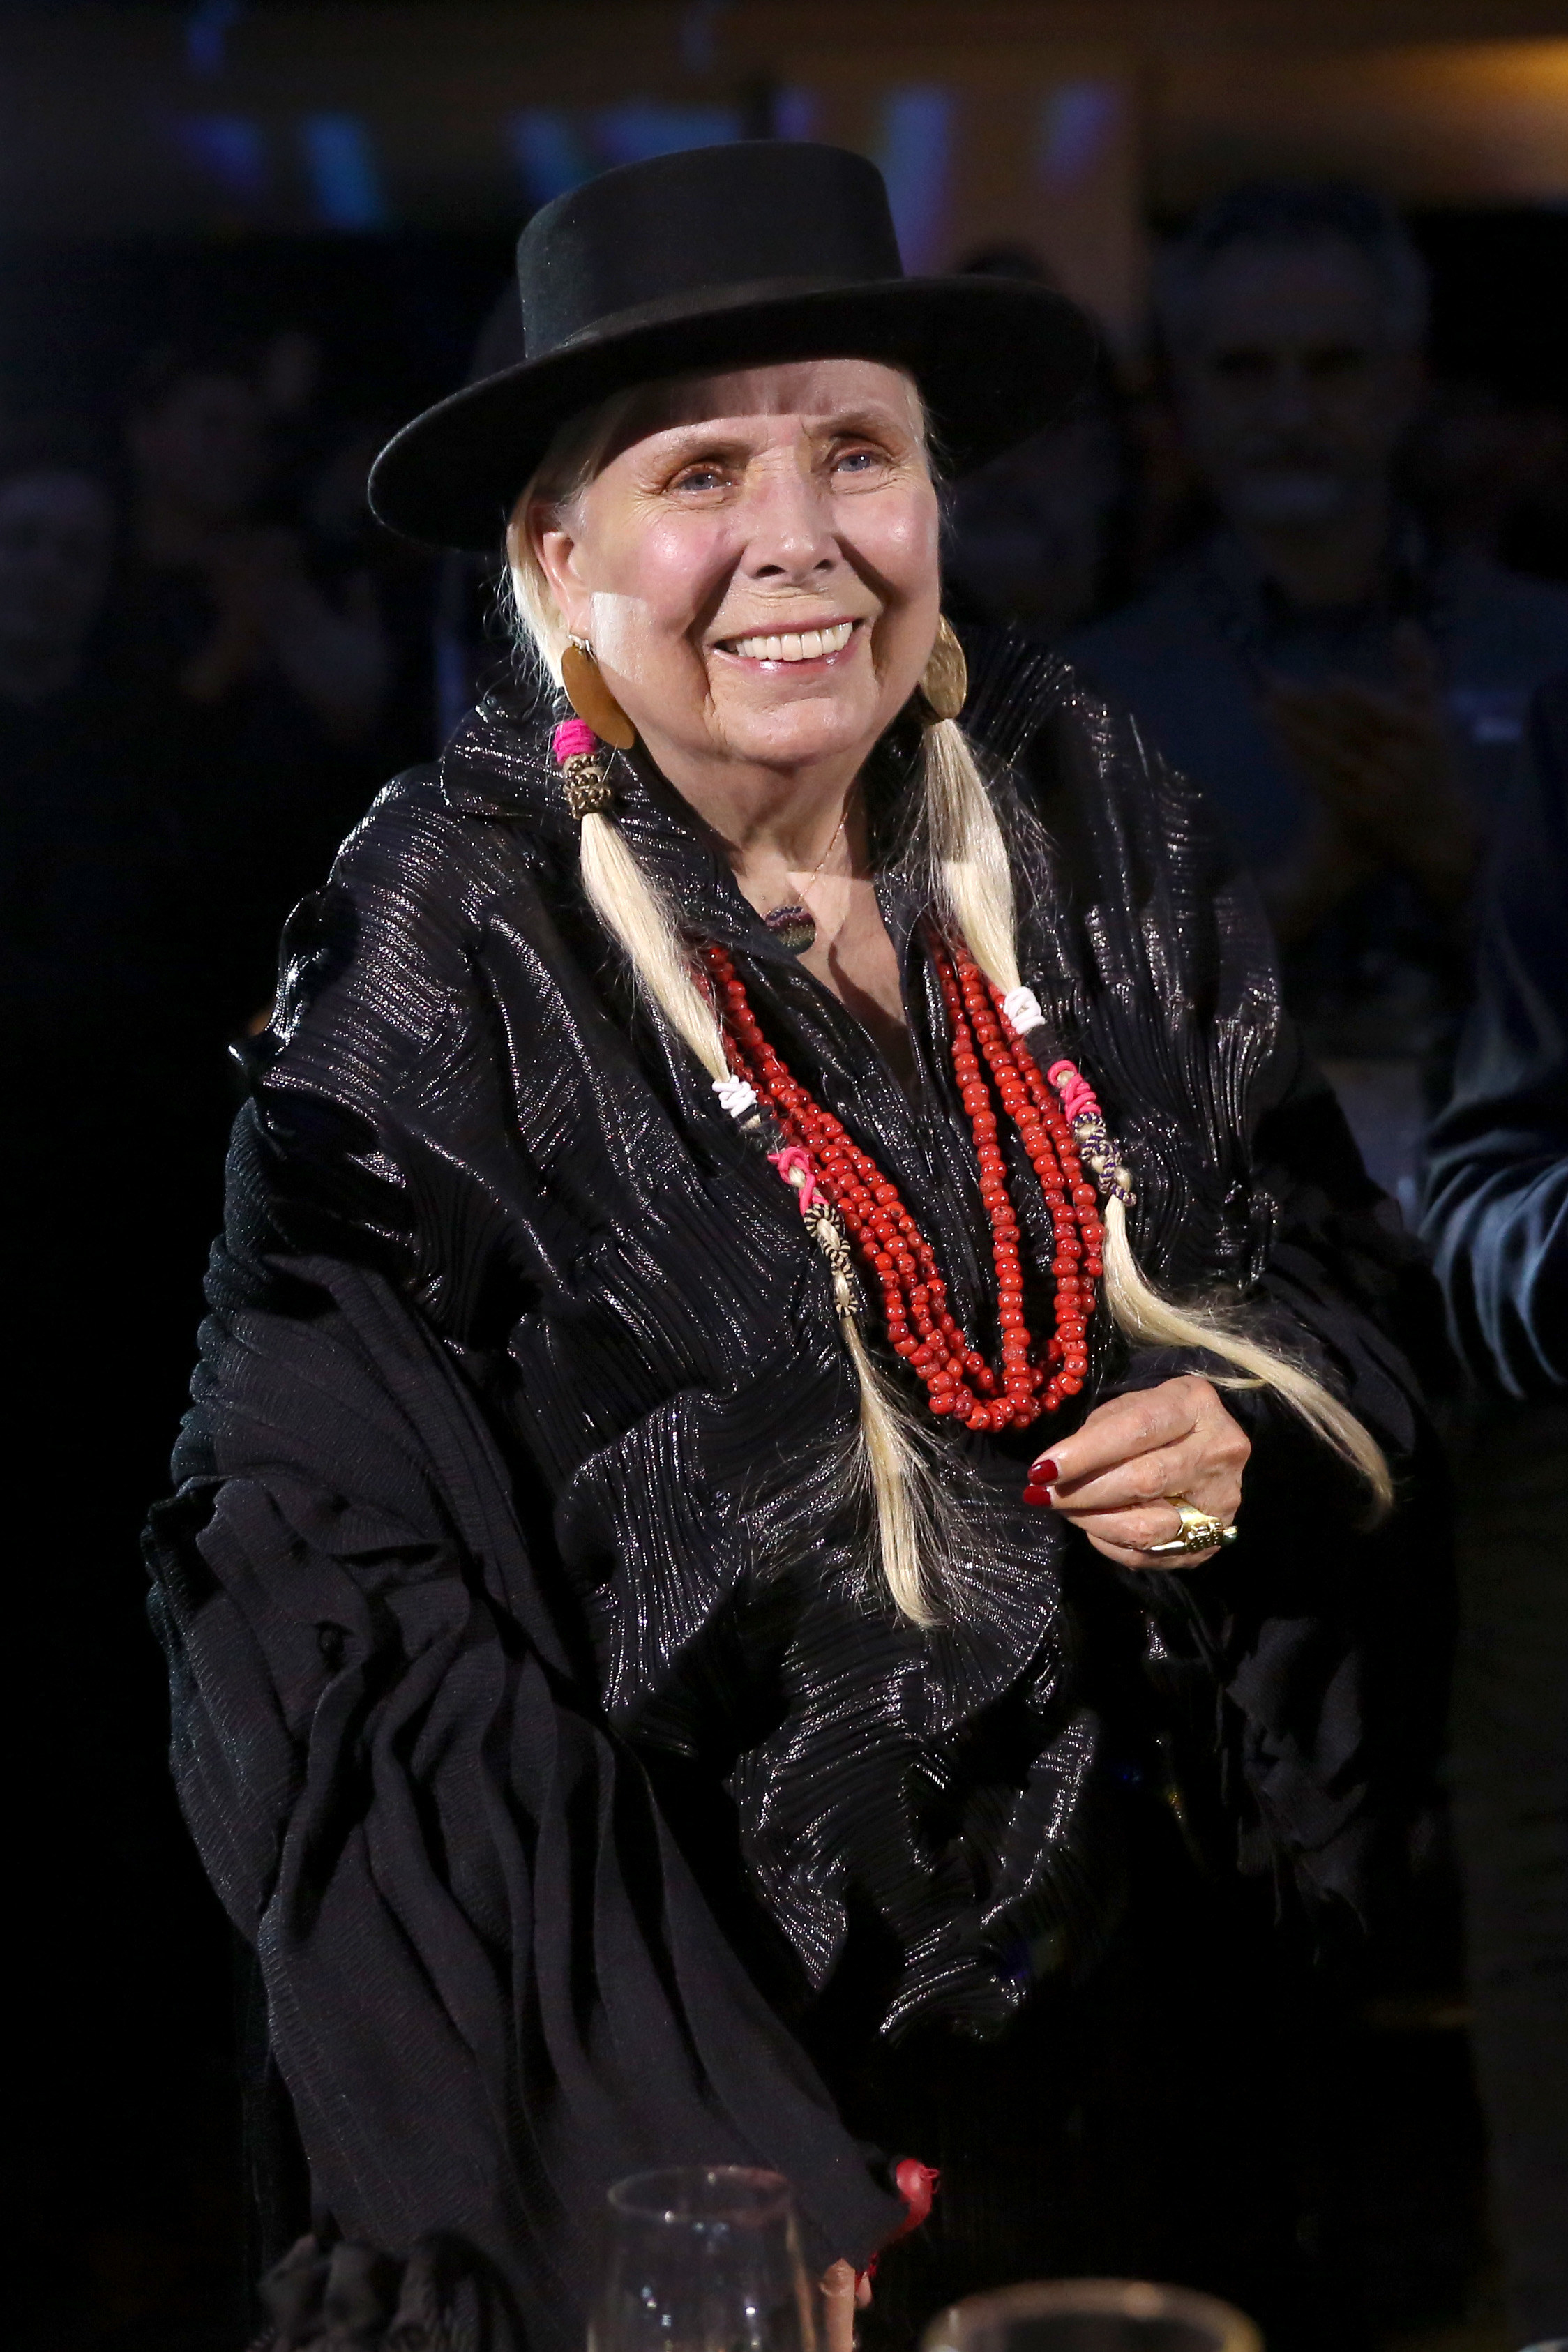 Joni Mitchell smiles at an event